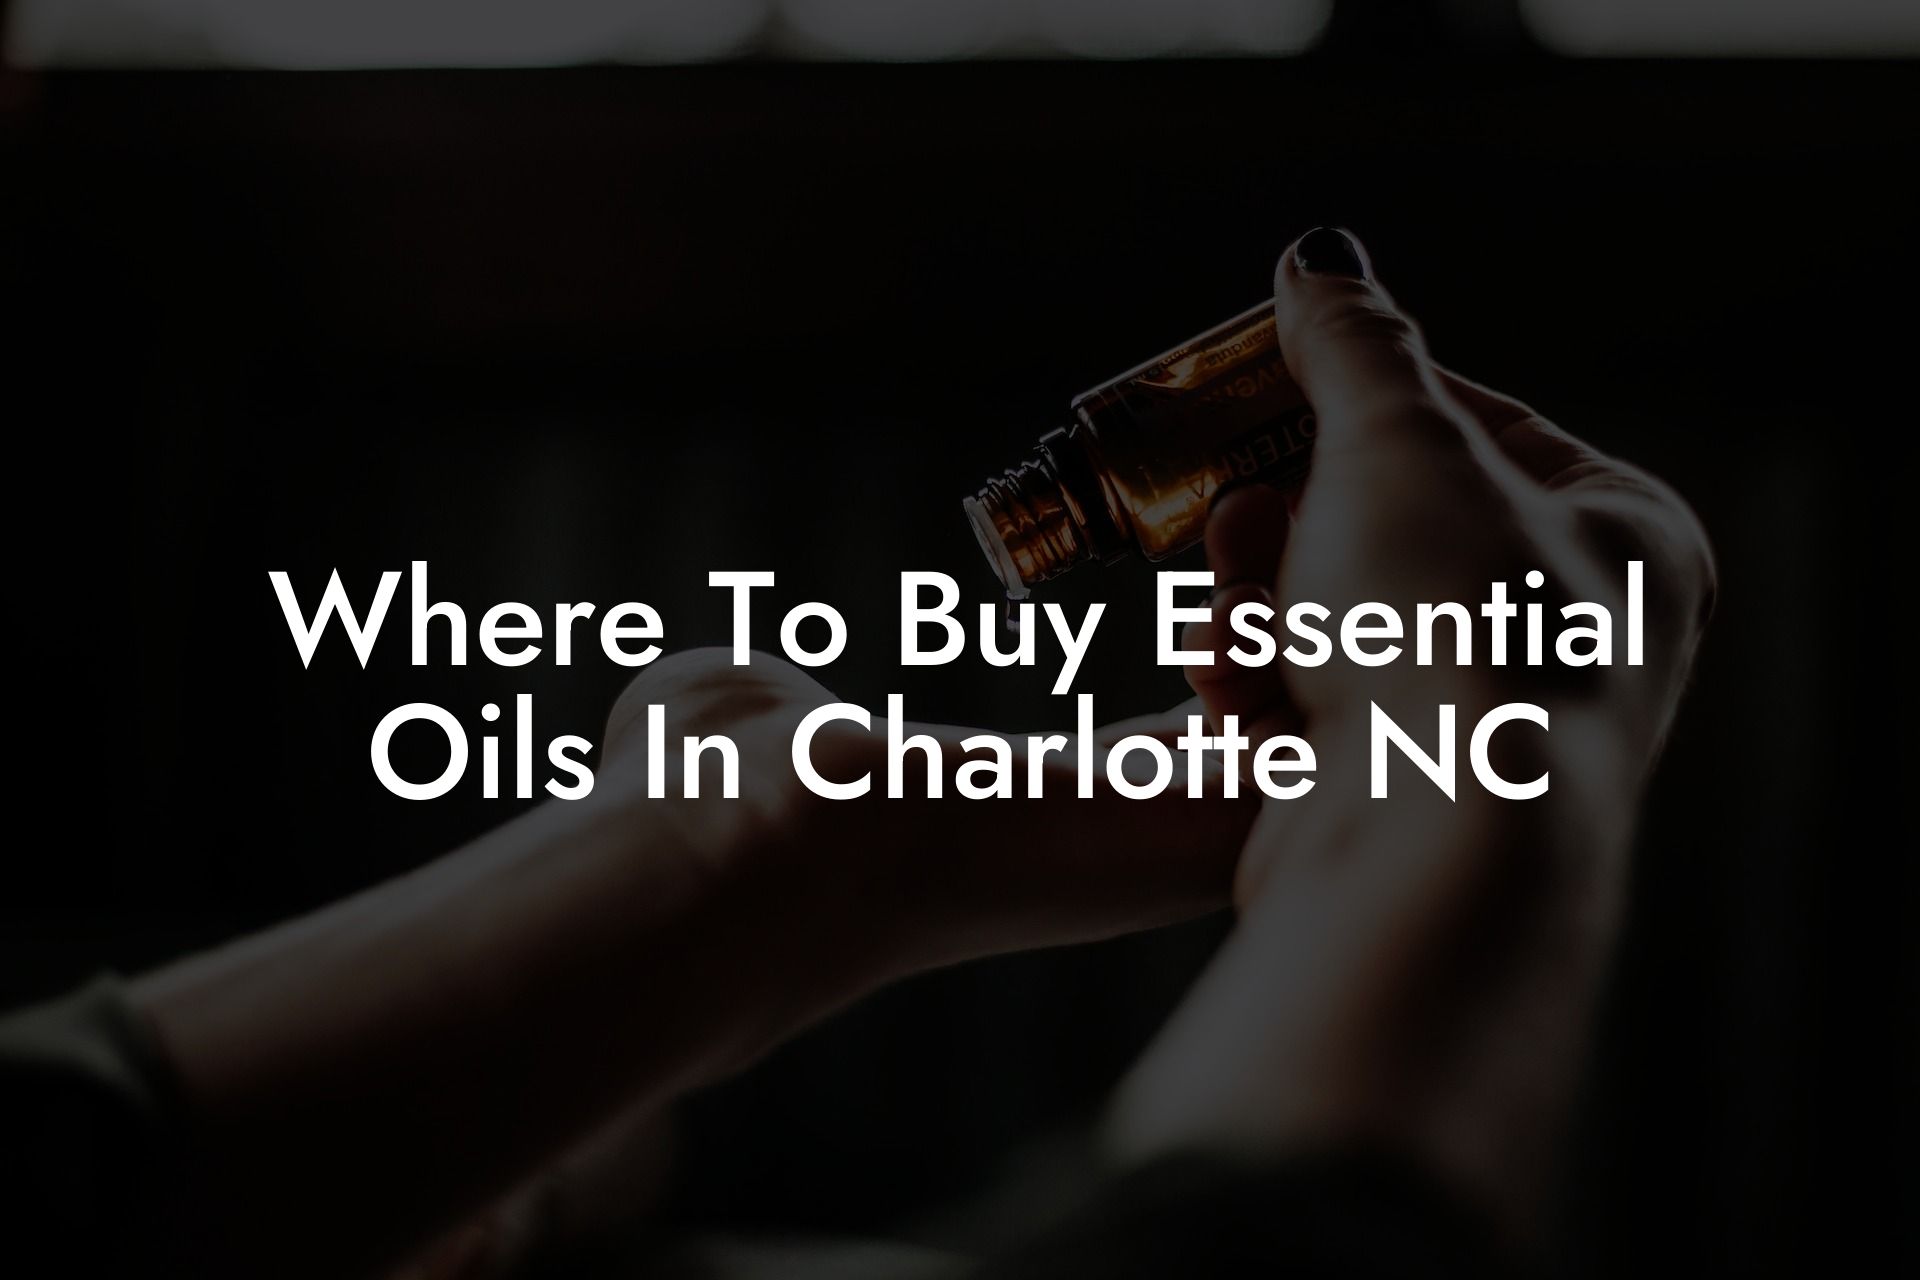 Where To Buy Essential Oils In Charlotte NC